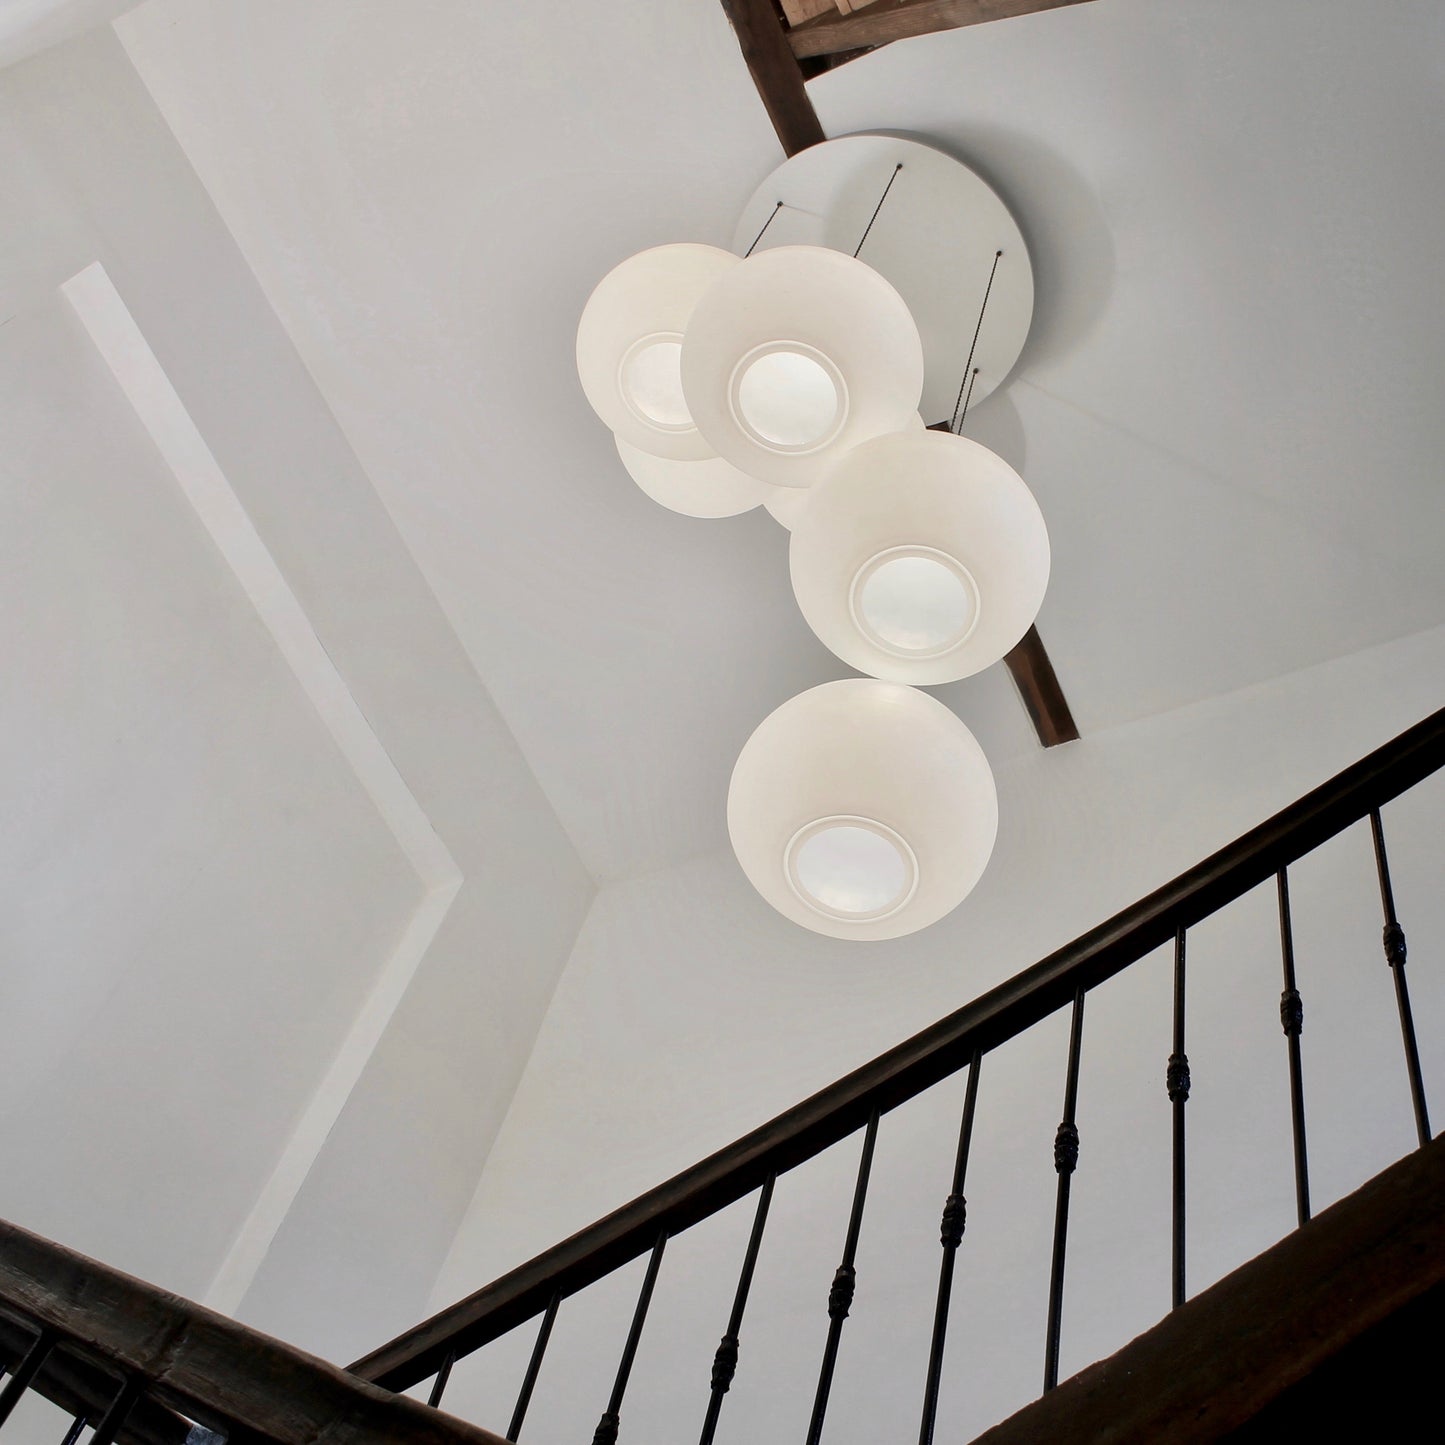 Polly Inverse 6-Drop, Stairwell lighting from One Foot Taller, hotel lobby lighting, multiple drop, ceiling lighting